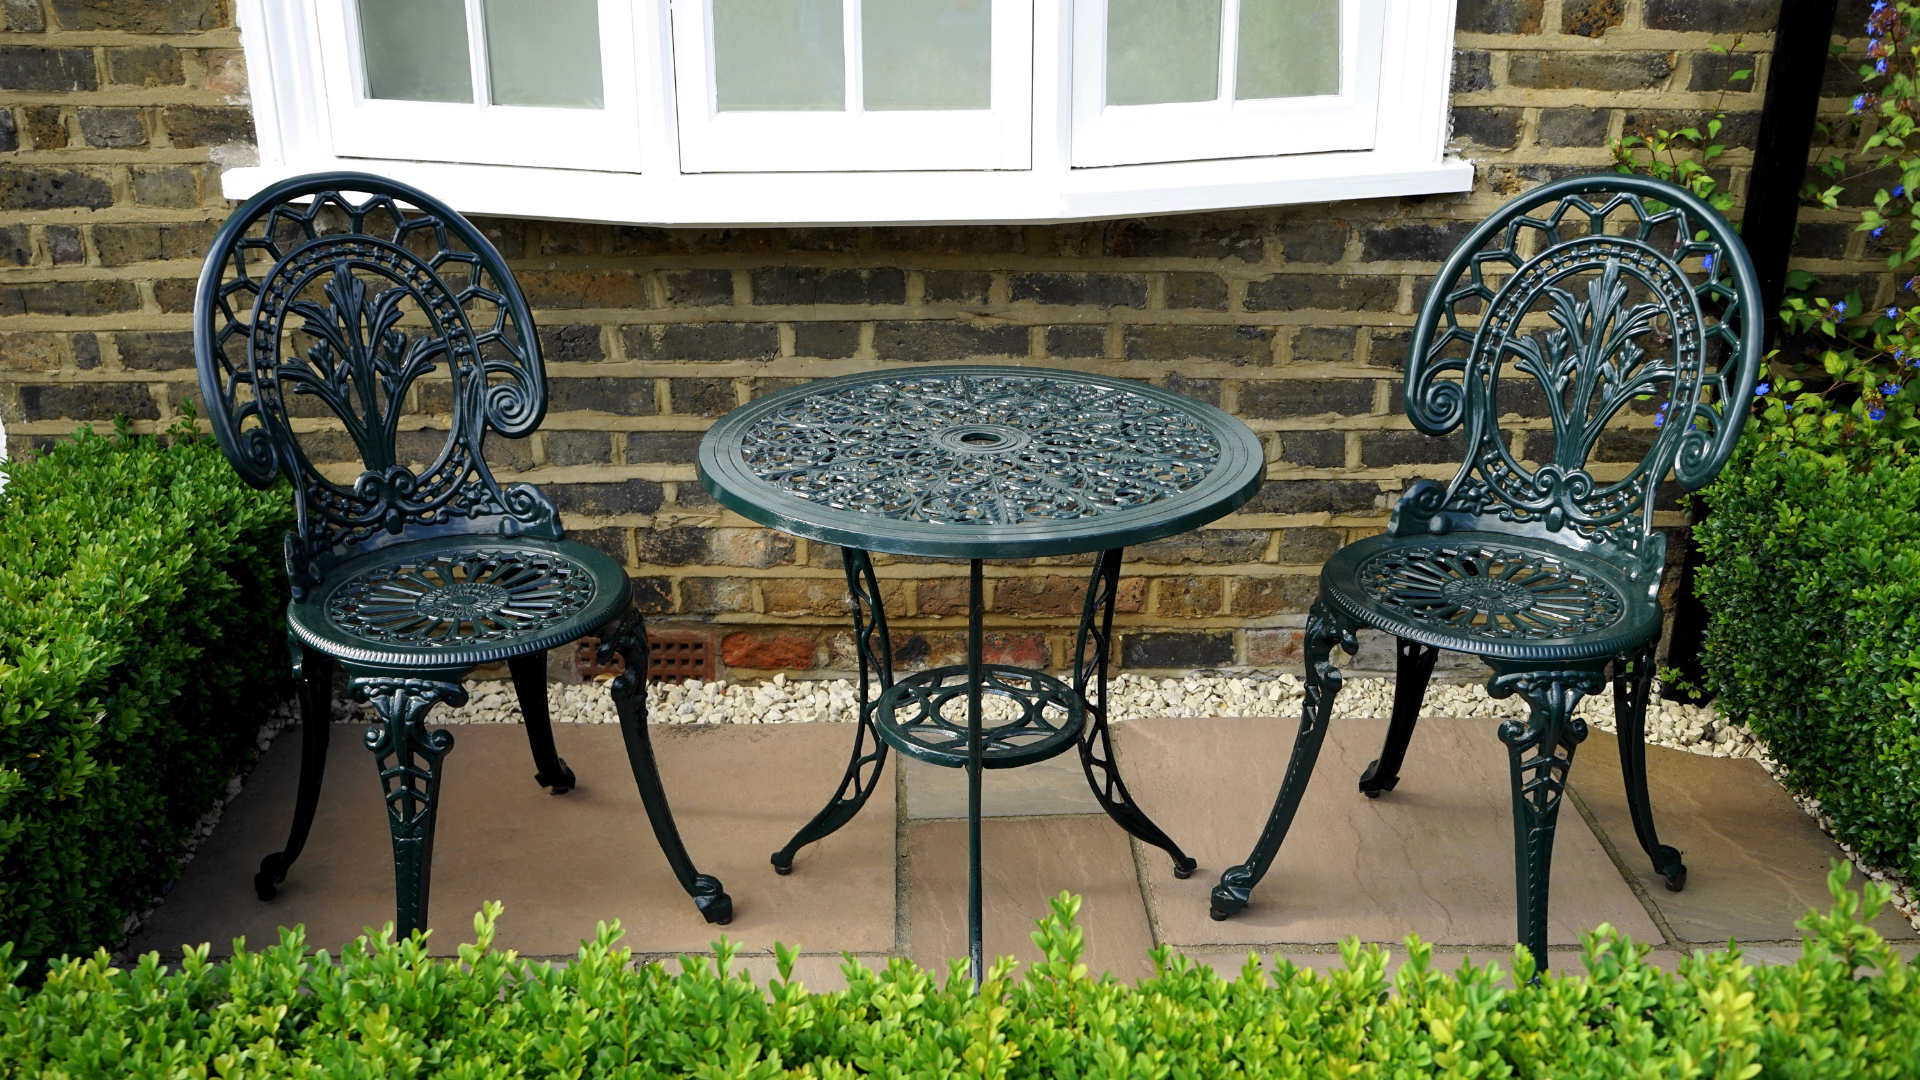 Wrought iron table legs are very decorative and ornamental, as they can feature intricate designs such as scrolls, curves, or twists.